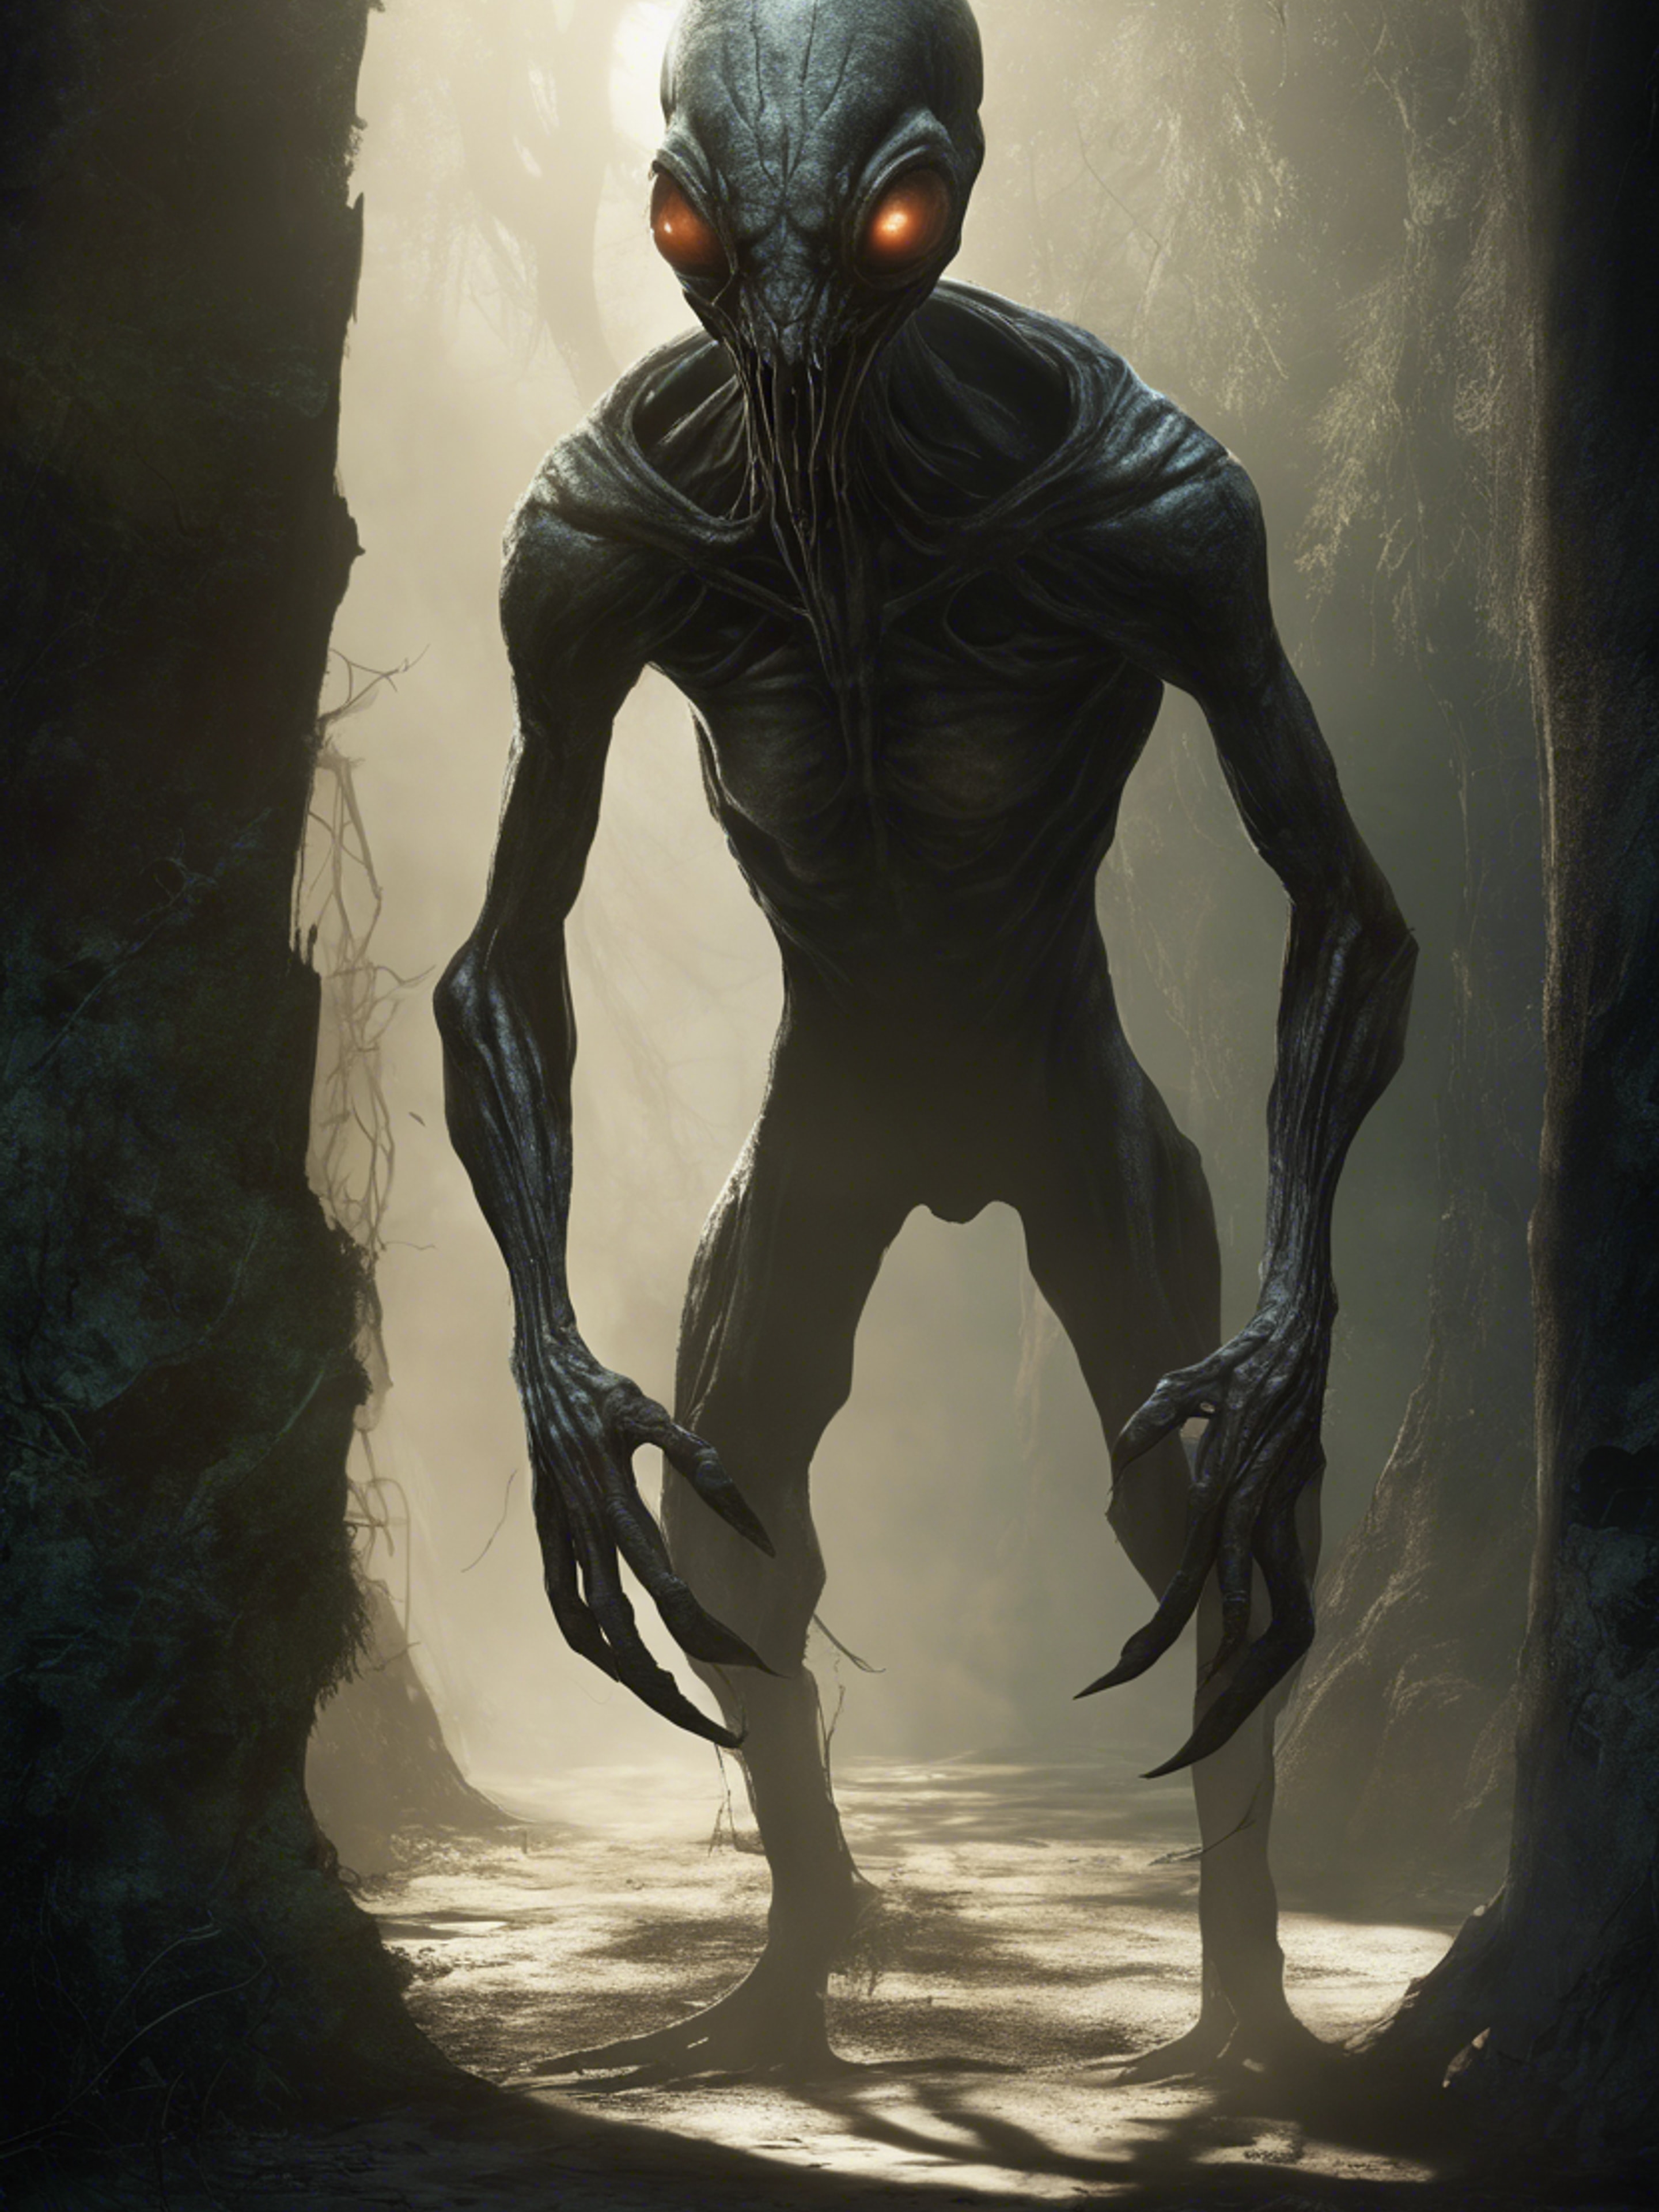 An eerie shot of an alien creature from a sci-fi horror game, emerging from the shadows. Tapetai[70e4d6a77d4241508cba]